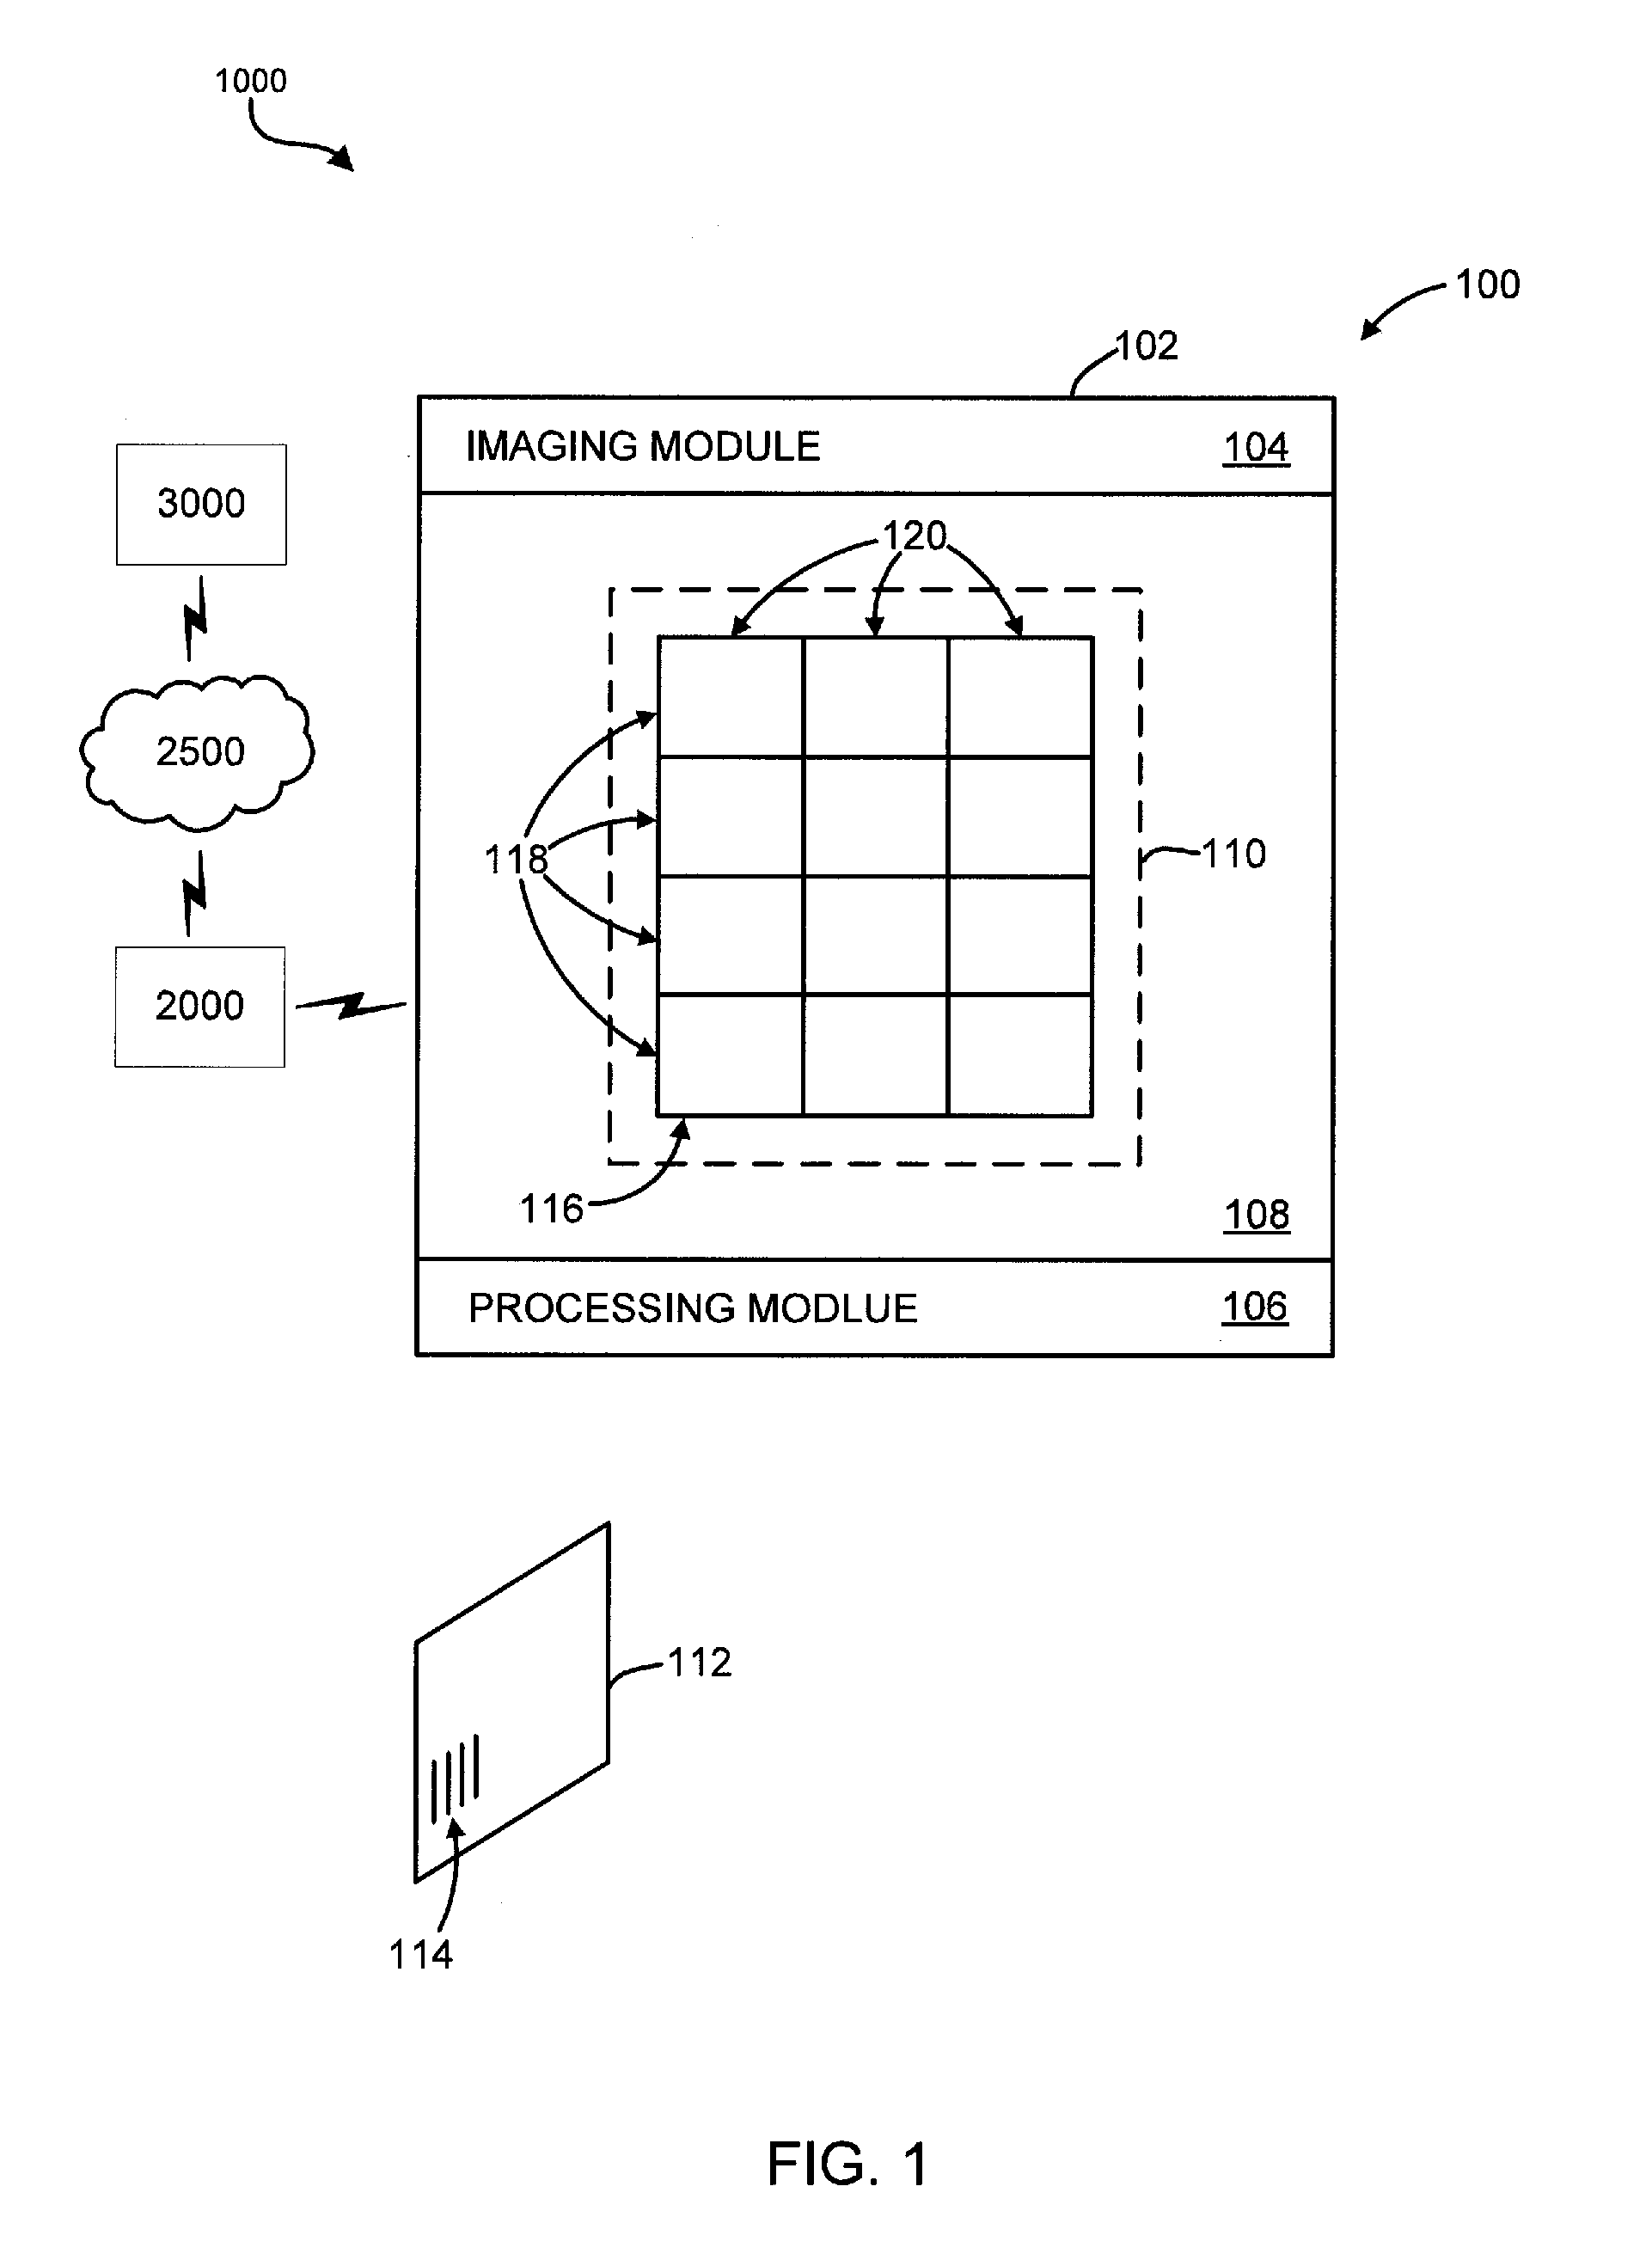 Document decoding system and method for improved decoding performance of indicia reading terminal